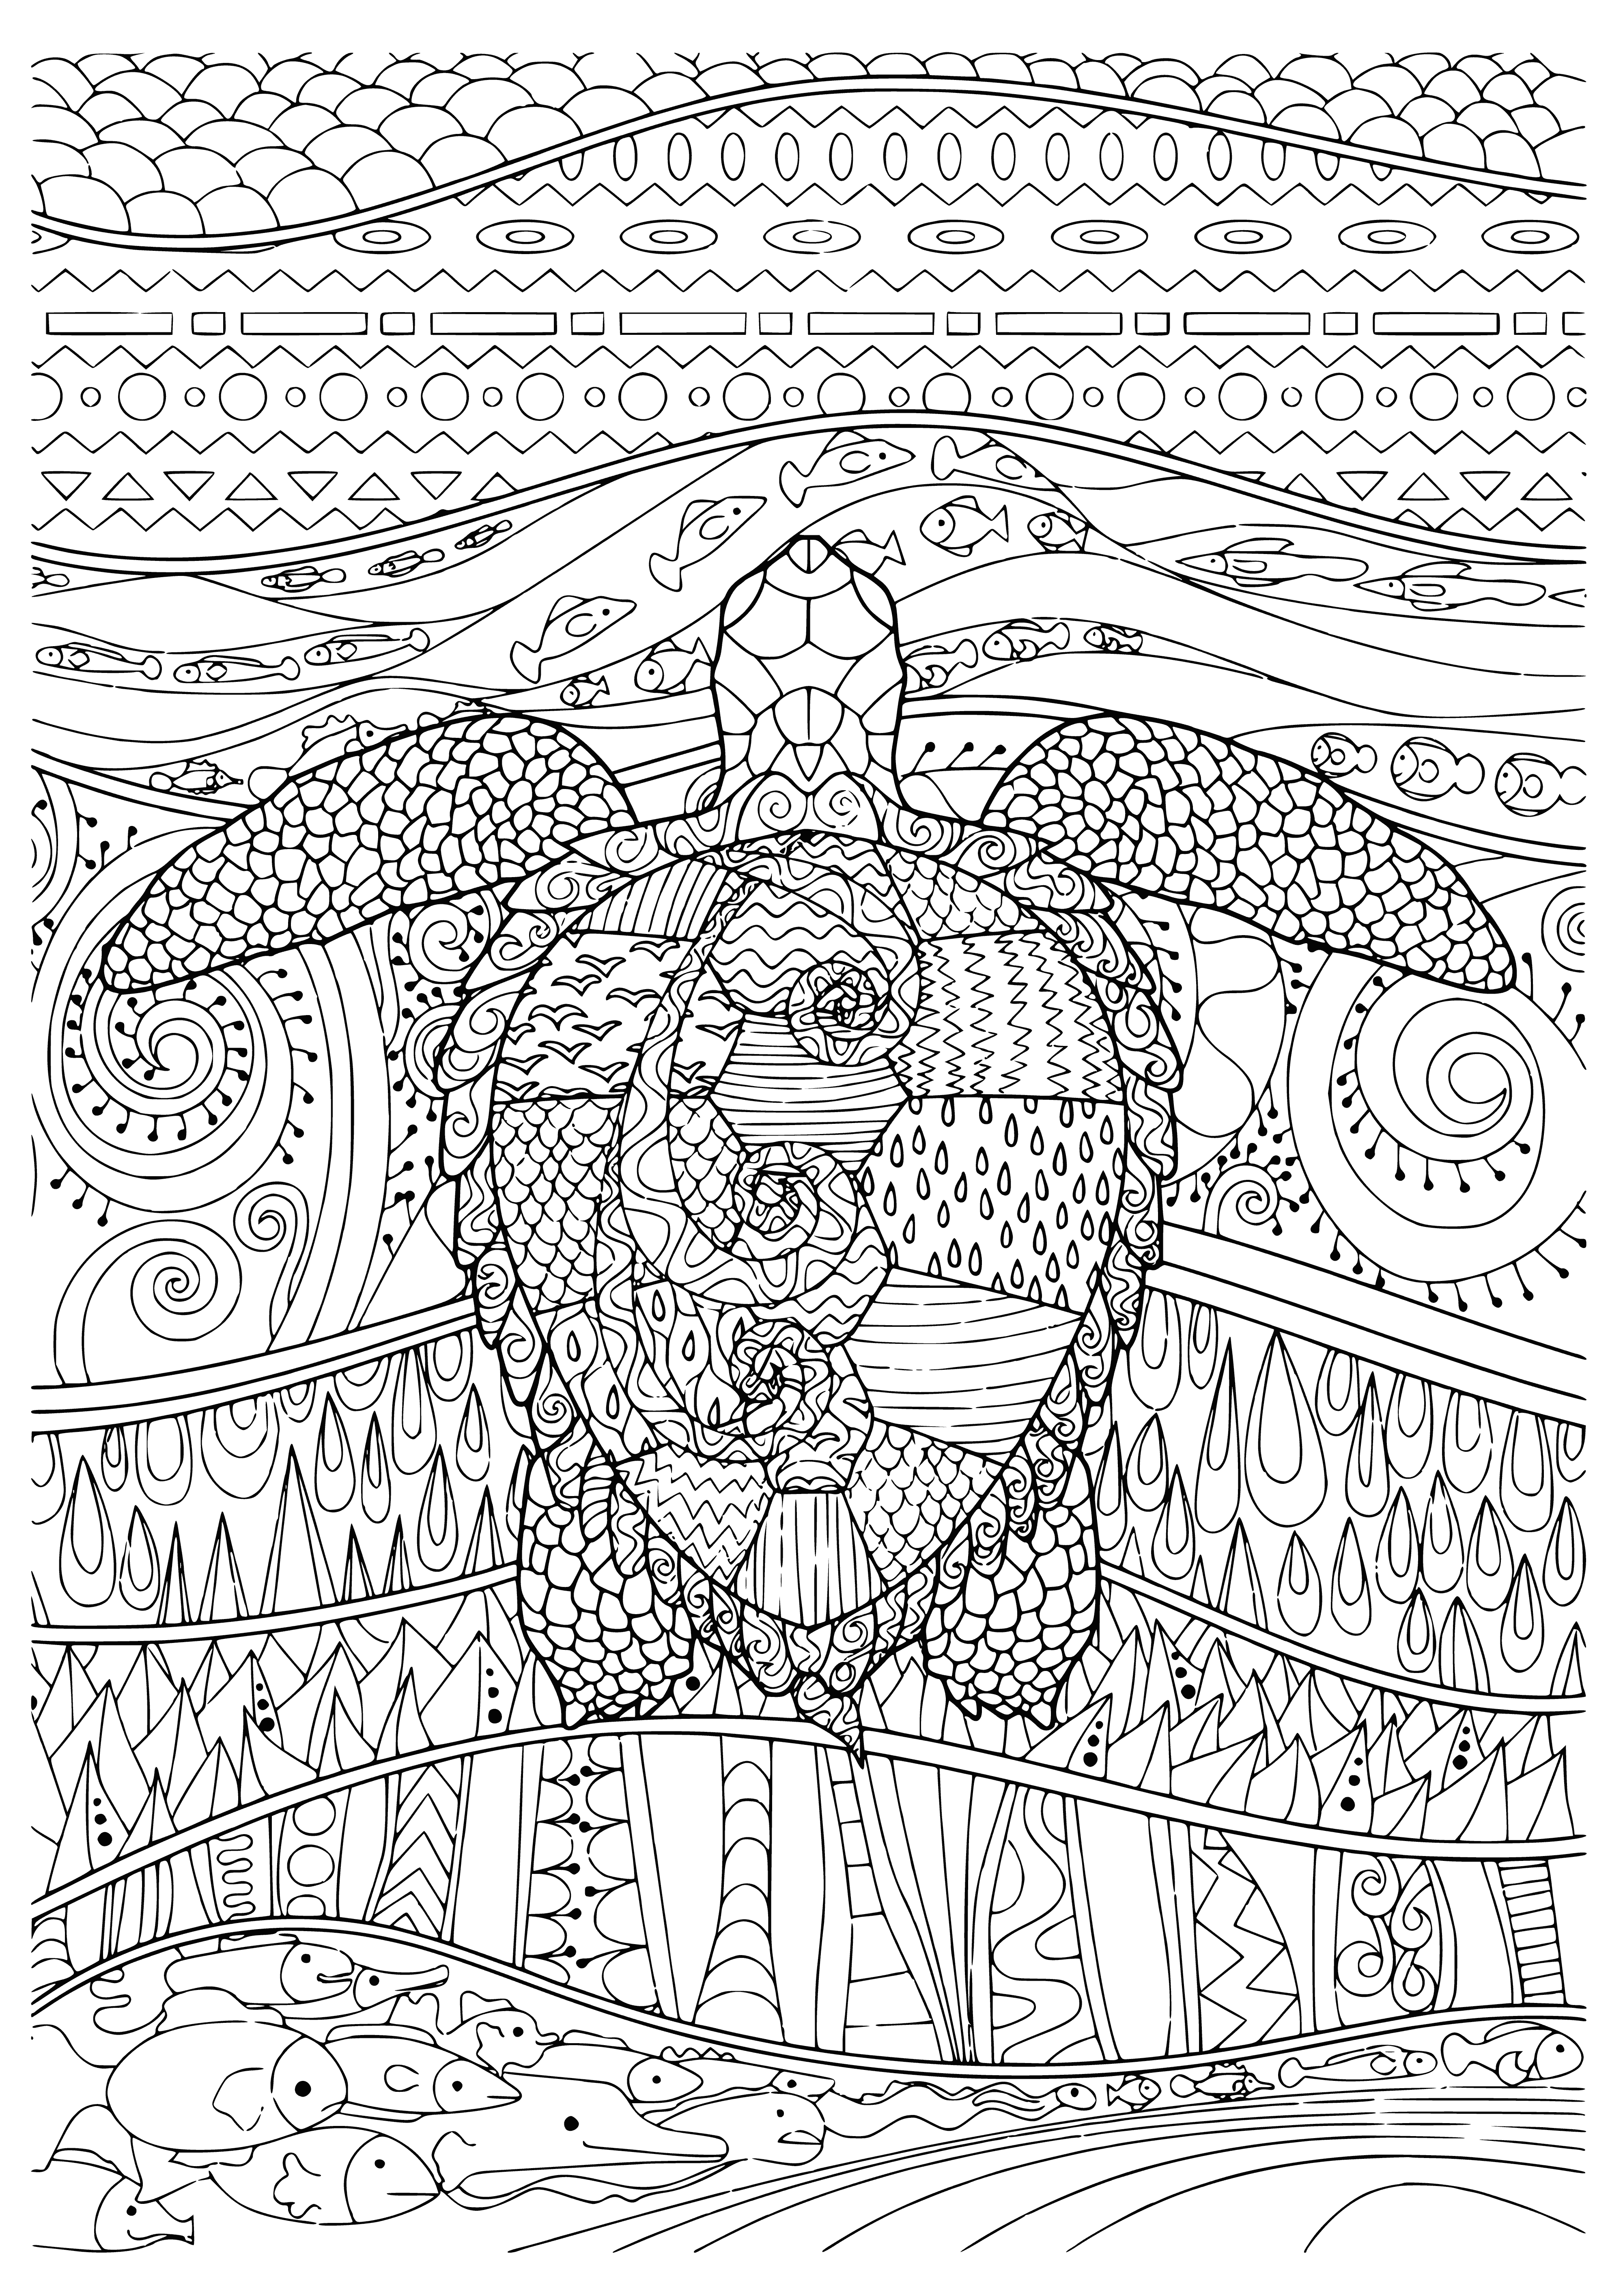 coloring page: Sea turtle gracefully drifting through a warm ocean, symbolizing strength, endurance and wisdom.